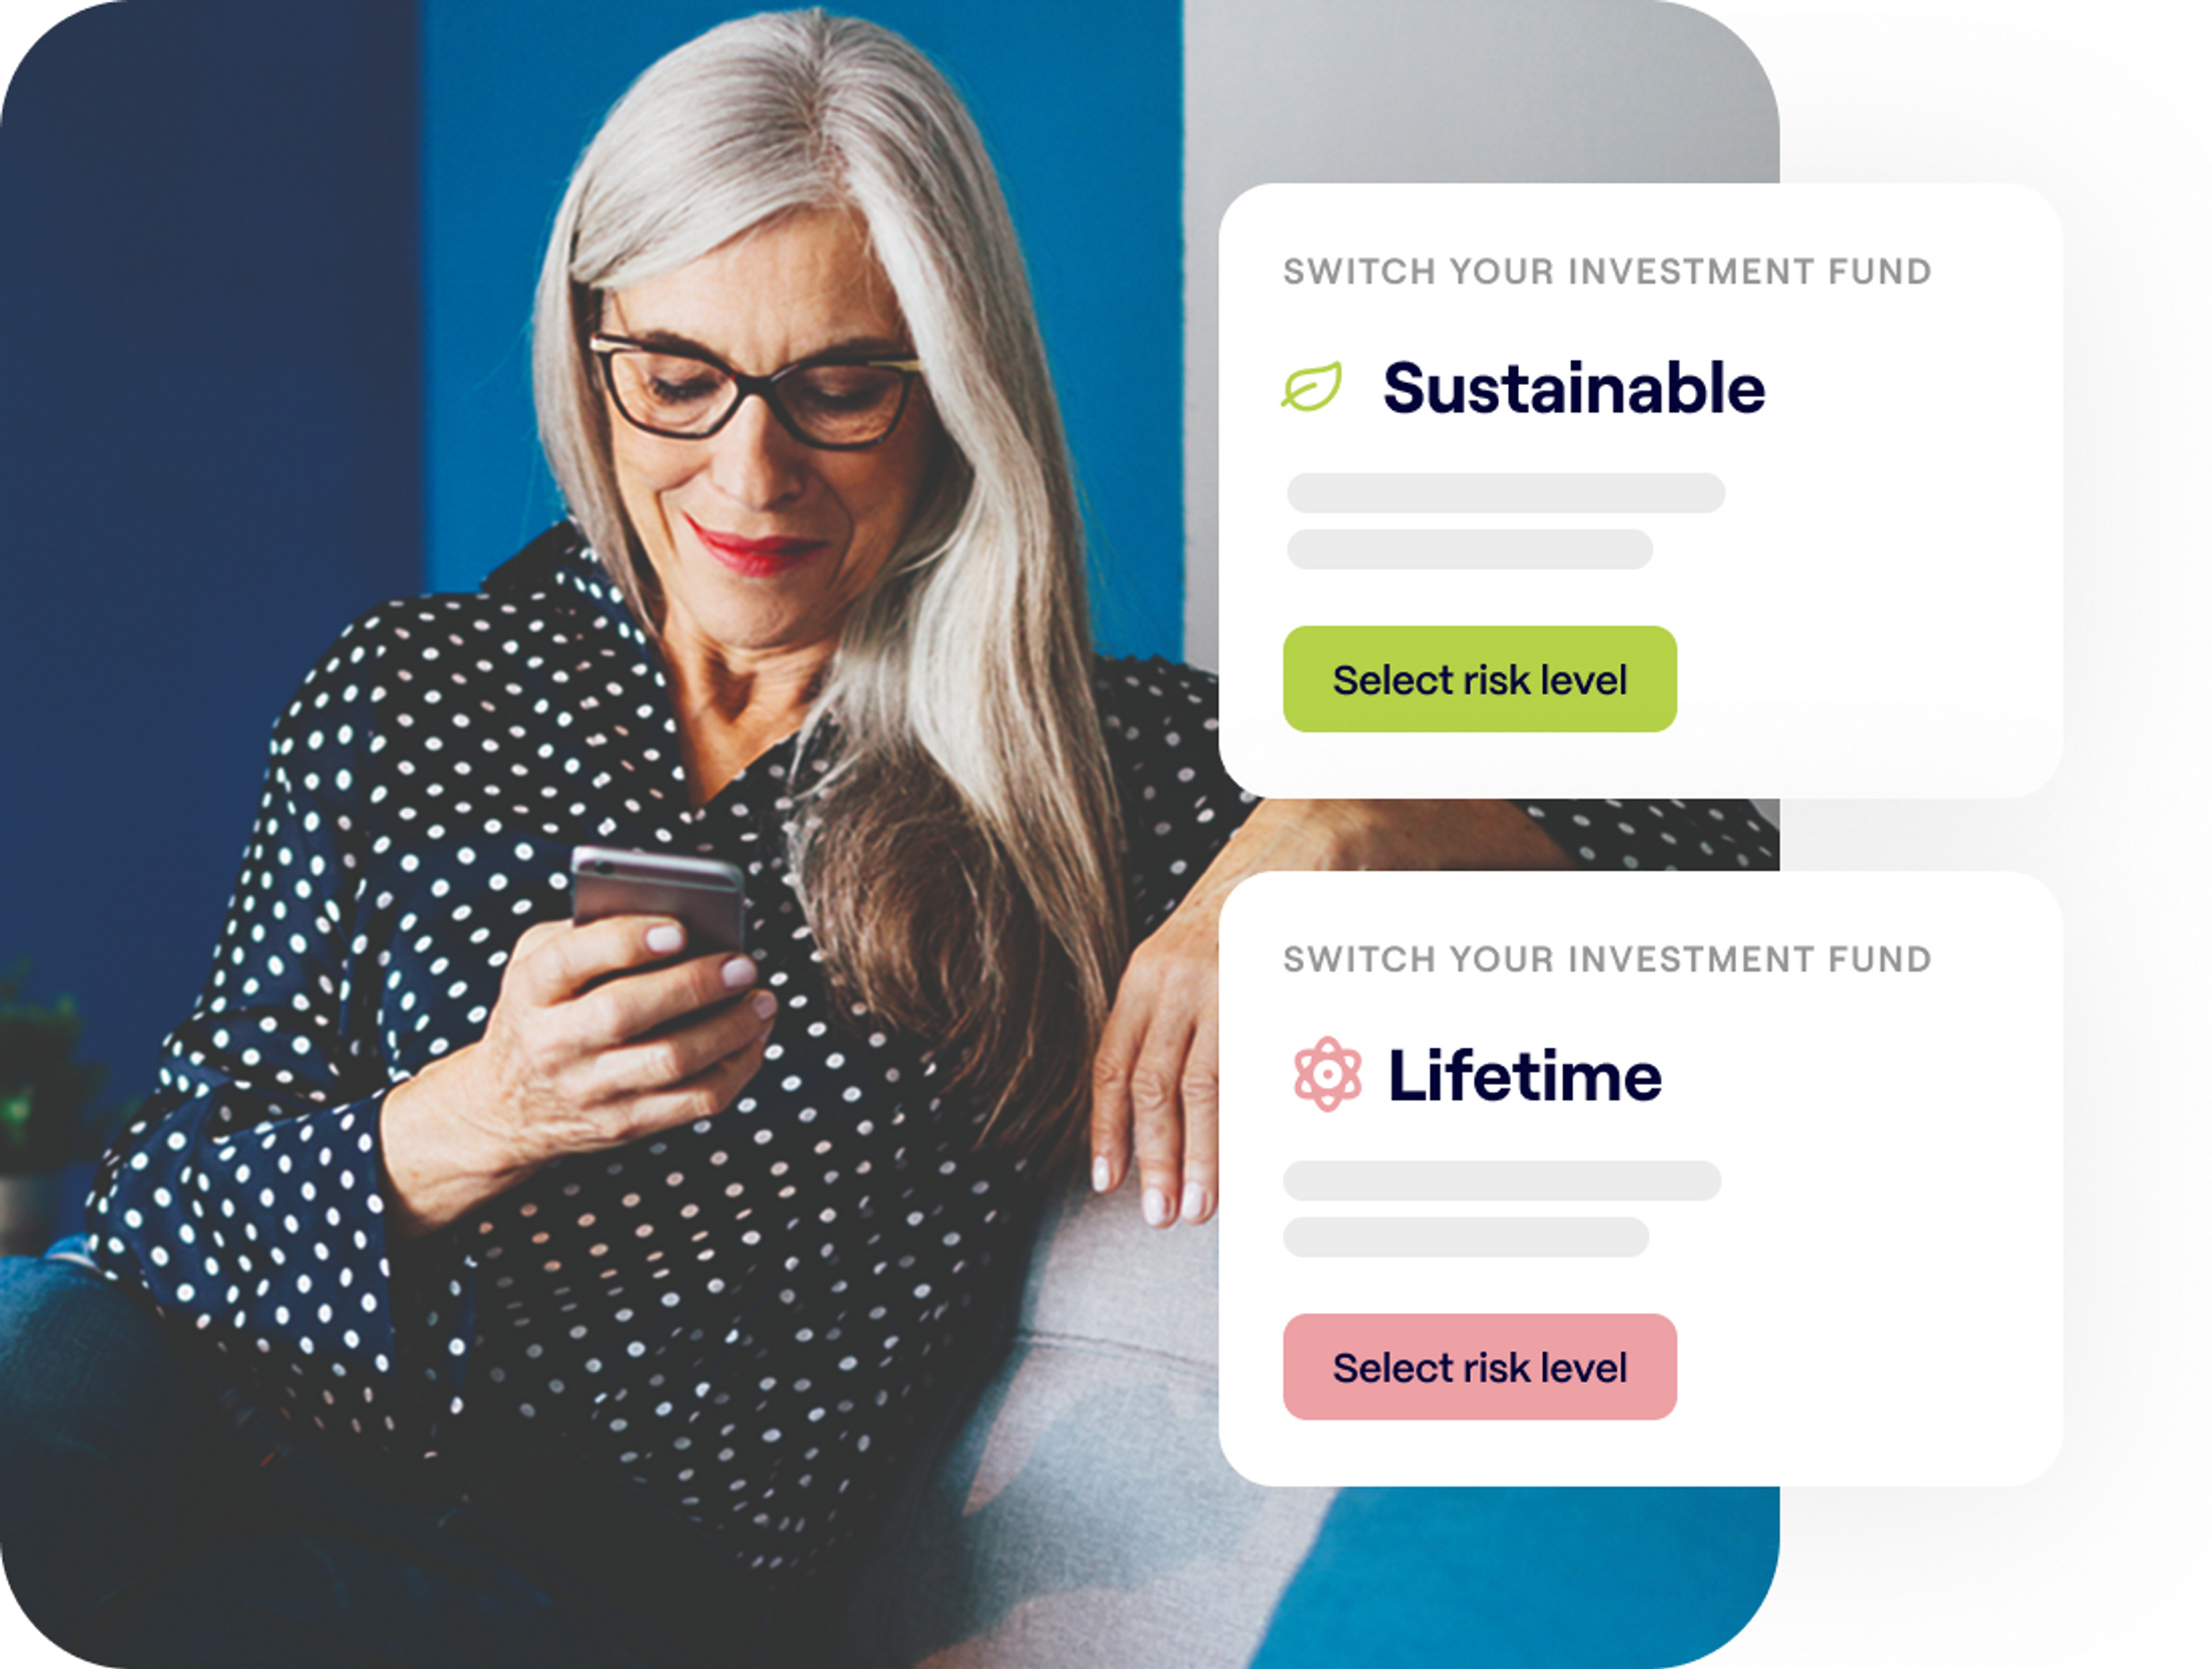 A photo of a woman looking down at a phone in her hand with overlay excerpts of the Penfold app showing 'Sustainable investment fund' and 'Lifetime investment fund'